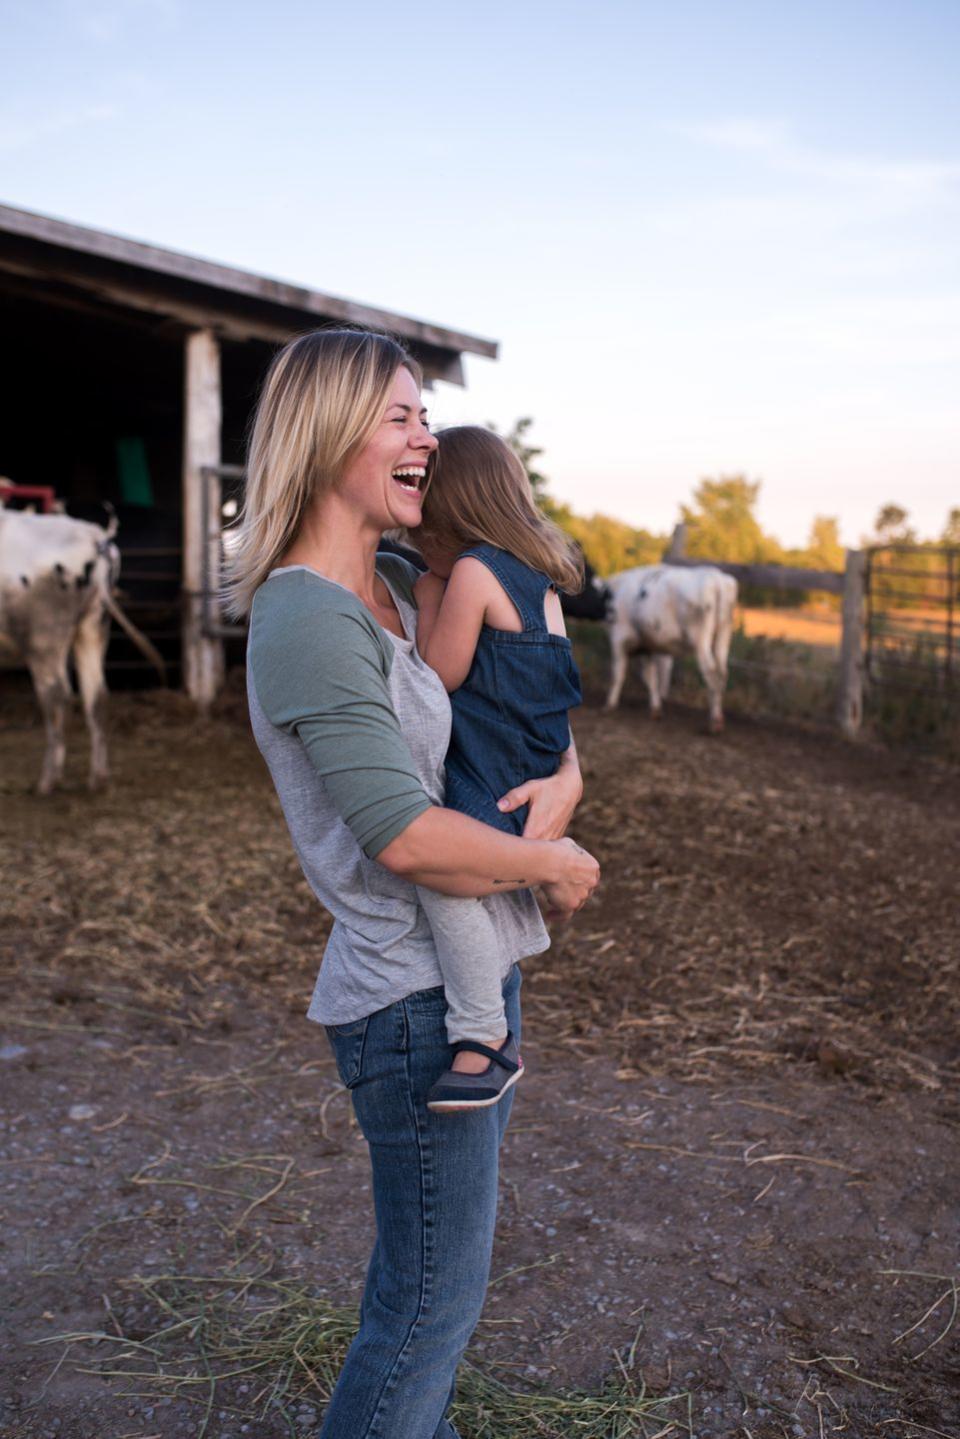 WITH YOUR DAUGHTER: Visit a farm and feed the animals.